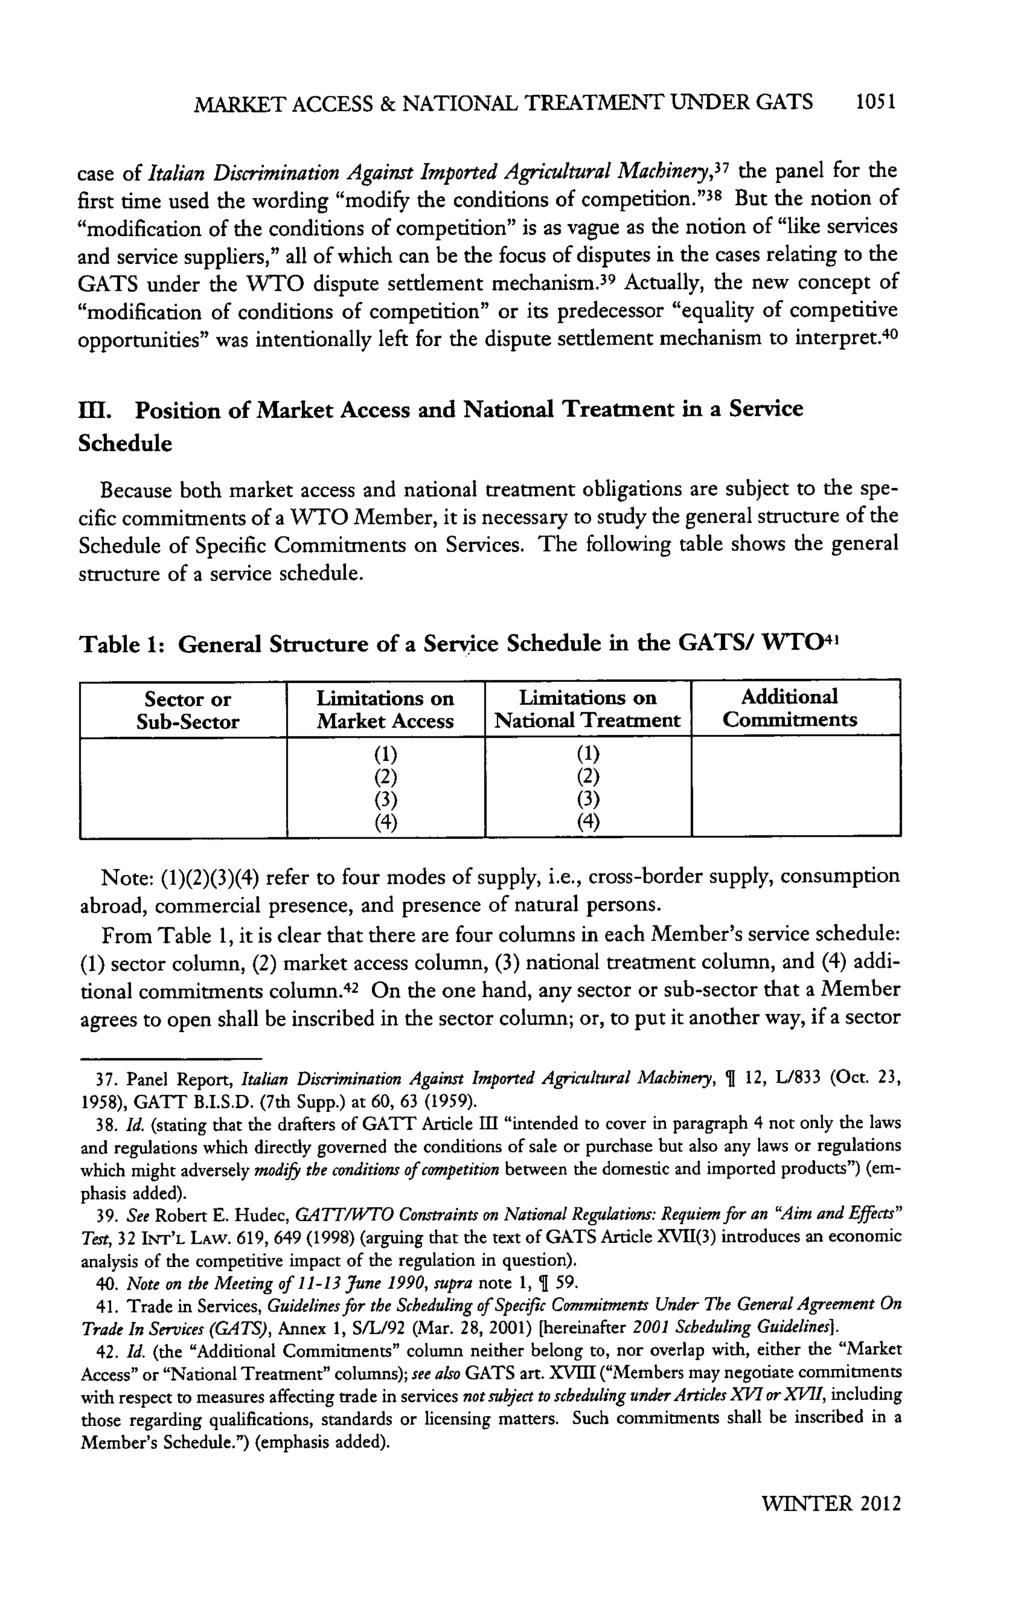 MARKET ACCESS & NATIONAL TREATMENT UNDER GATS 1051 case of Italian Discrimination Against Imported Agricultural Machinery, 37 the panel for the first time used the wording "modify the conditions of